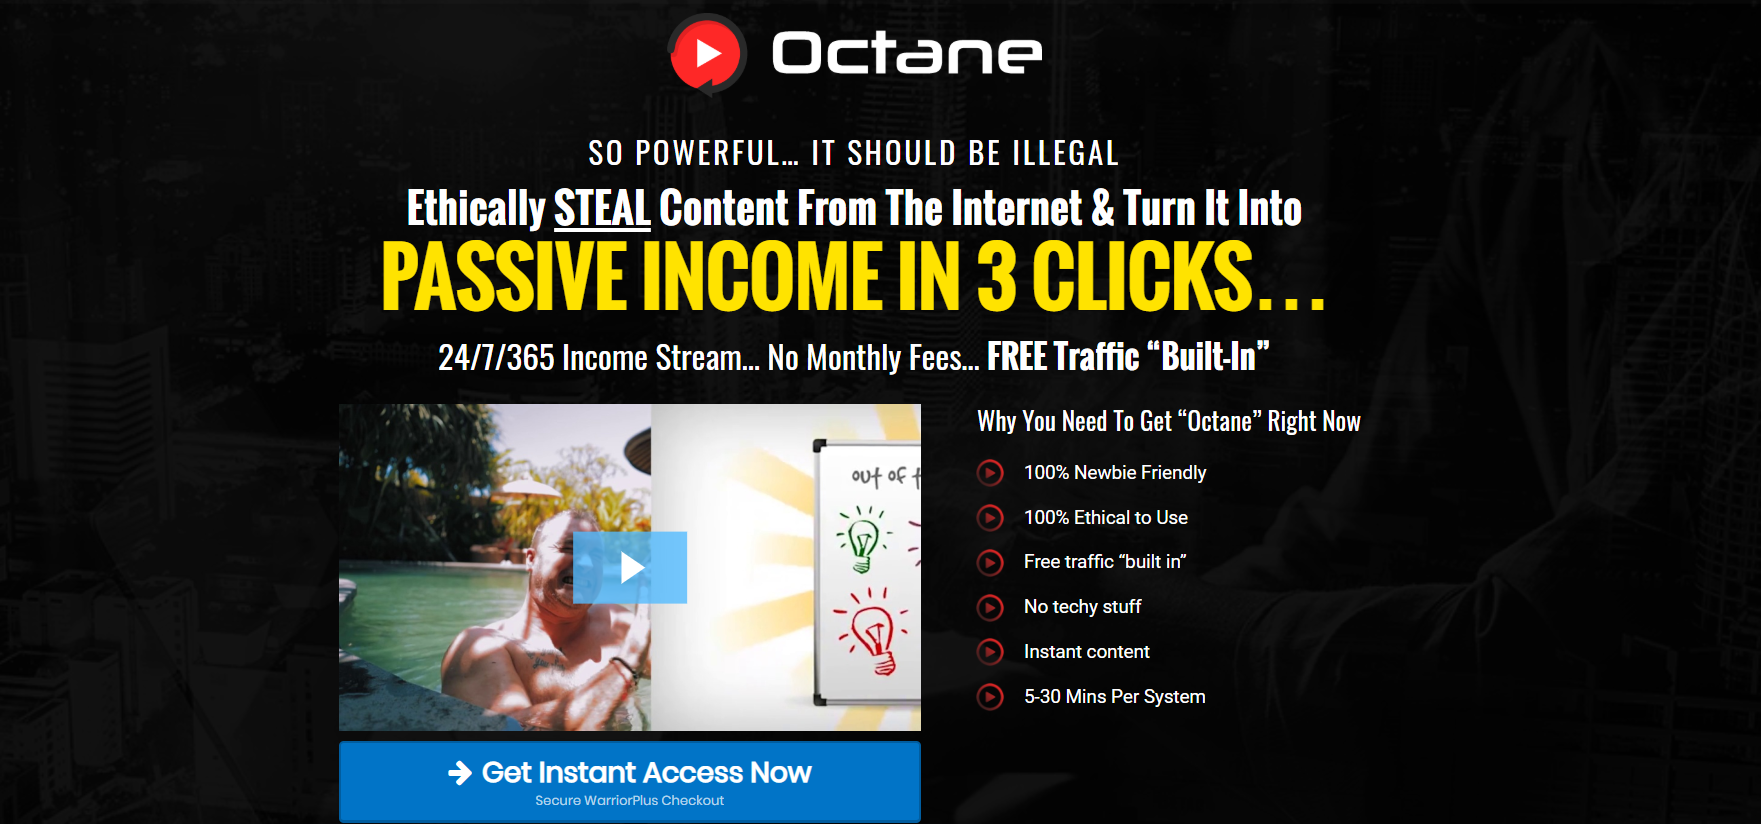 Octane Review and Custom Bonuses 🛑 Get Octane 🛑 Watch My Honest [Octane Review] 🛑 Get Custom Bonuses So powerful… it should be illegal Ethically STEAL Content from the internet & turn it into PASSIVE INCOME in 3 Clicks… 24/7/365 income stream… No monthly fees… FREE Traffic “built-in” Get Instant Access Now Secure WarriorPlus Checkout Why You Need To Get “Octane” Right Now 100% Newbie Friendly 100% Ethical to Use Free traffic “built in” No techy stuff Instant content 5-30 Mins Per System Newbie-friendly - Make Money Today - 30 Day Money Back Guarantee